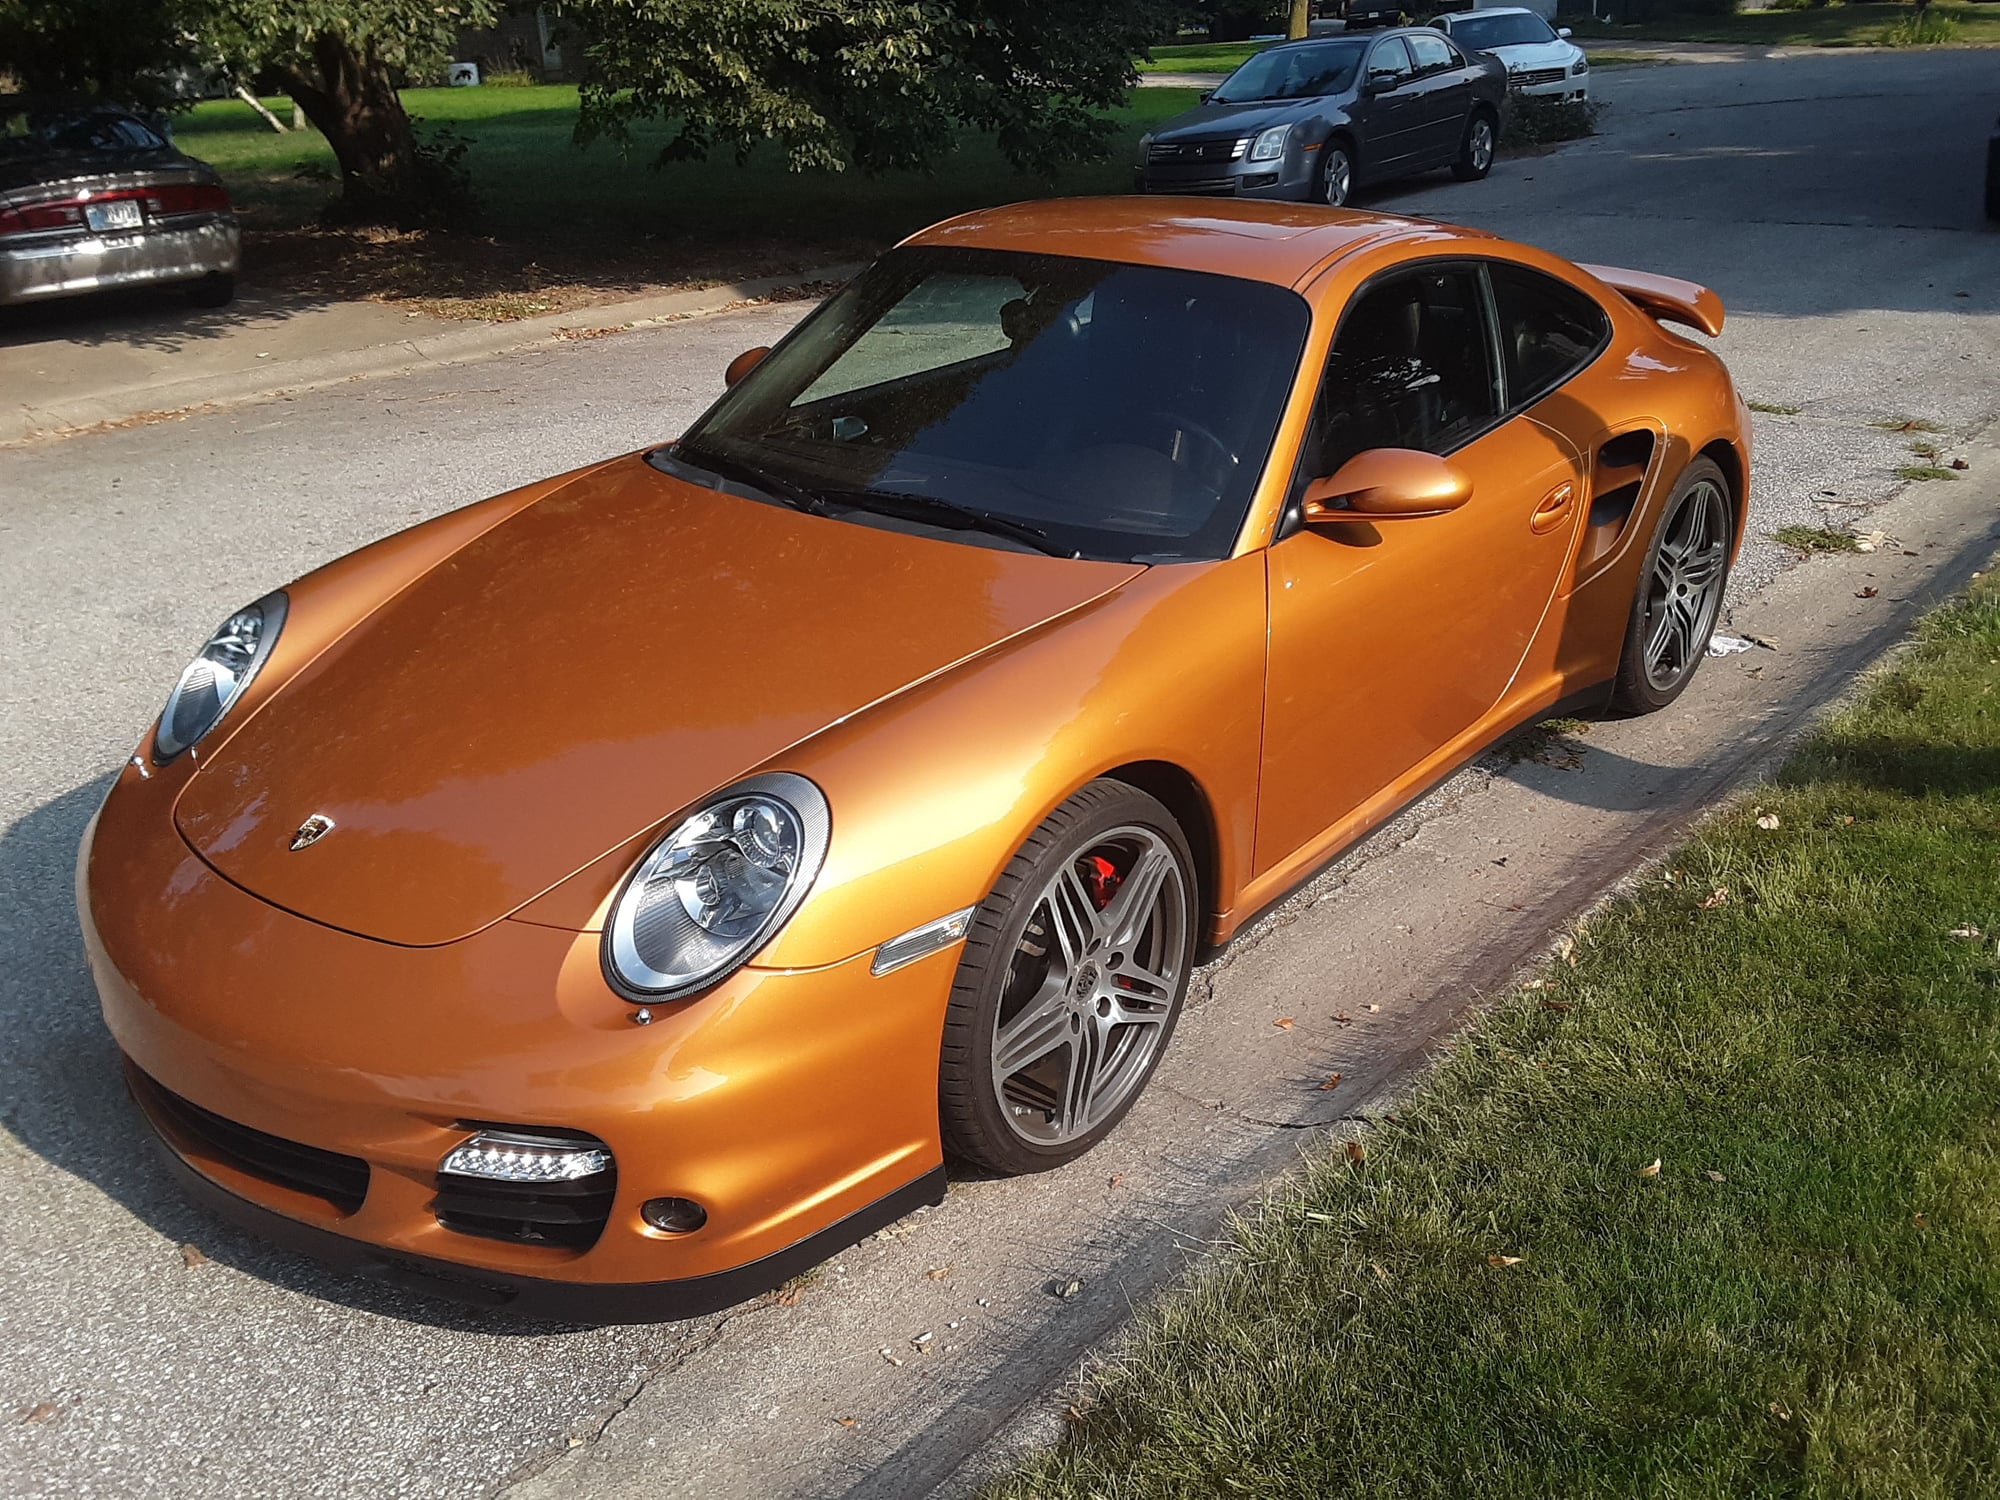 2007 Porsche 911 - 2007 911 Porsche Turbo for Sale - Used - VIN WP0AD29907S786340 - 36,268 Miles - 6 cyl - AWD - Automatic - Coupe - Gold - Kokomo, IN 46902, United States